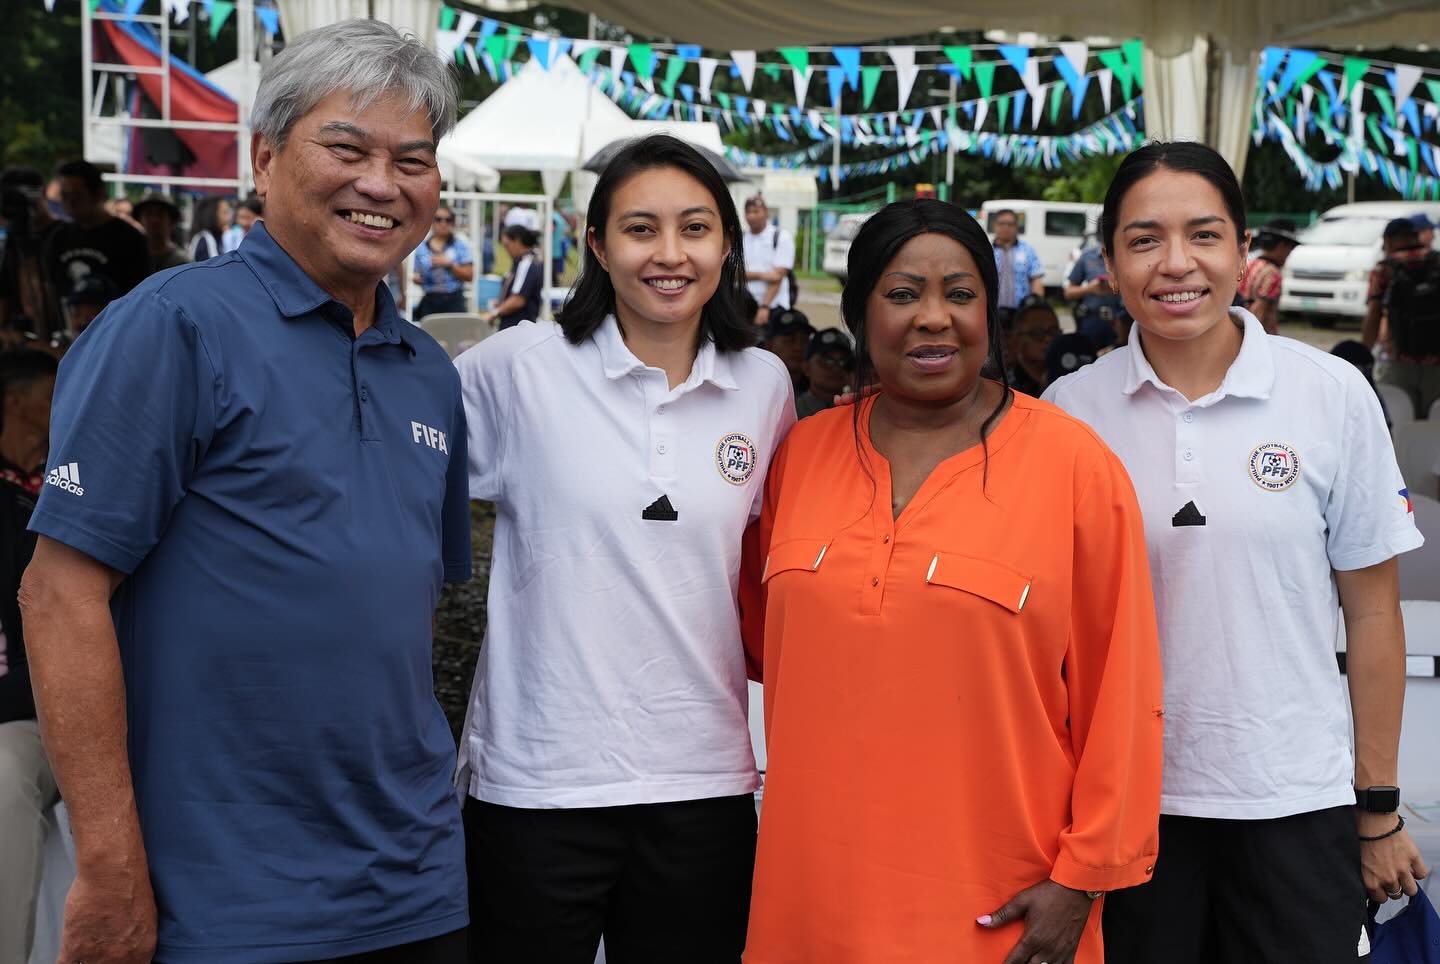 PFF launches FIFA Football For Schools Program in the Philippines